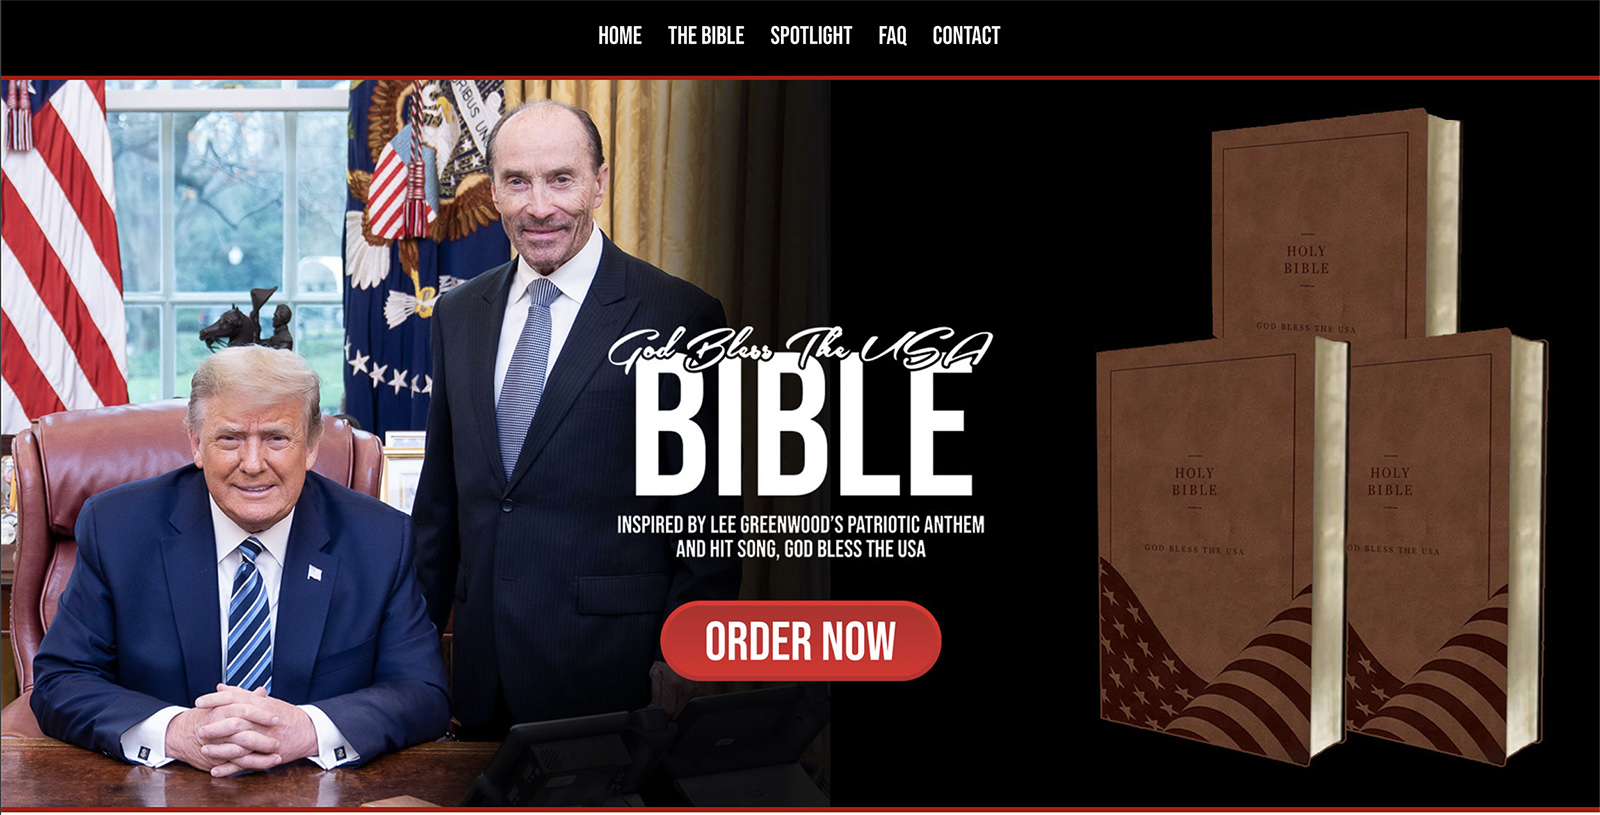 Former president Donald Trump, left, and musician Lee Greenwood on the website for the God Bless the USA Bible. (Screen grab)